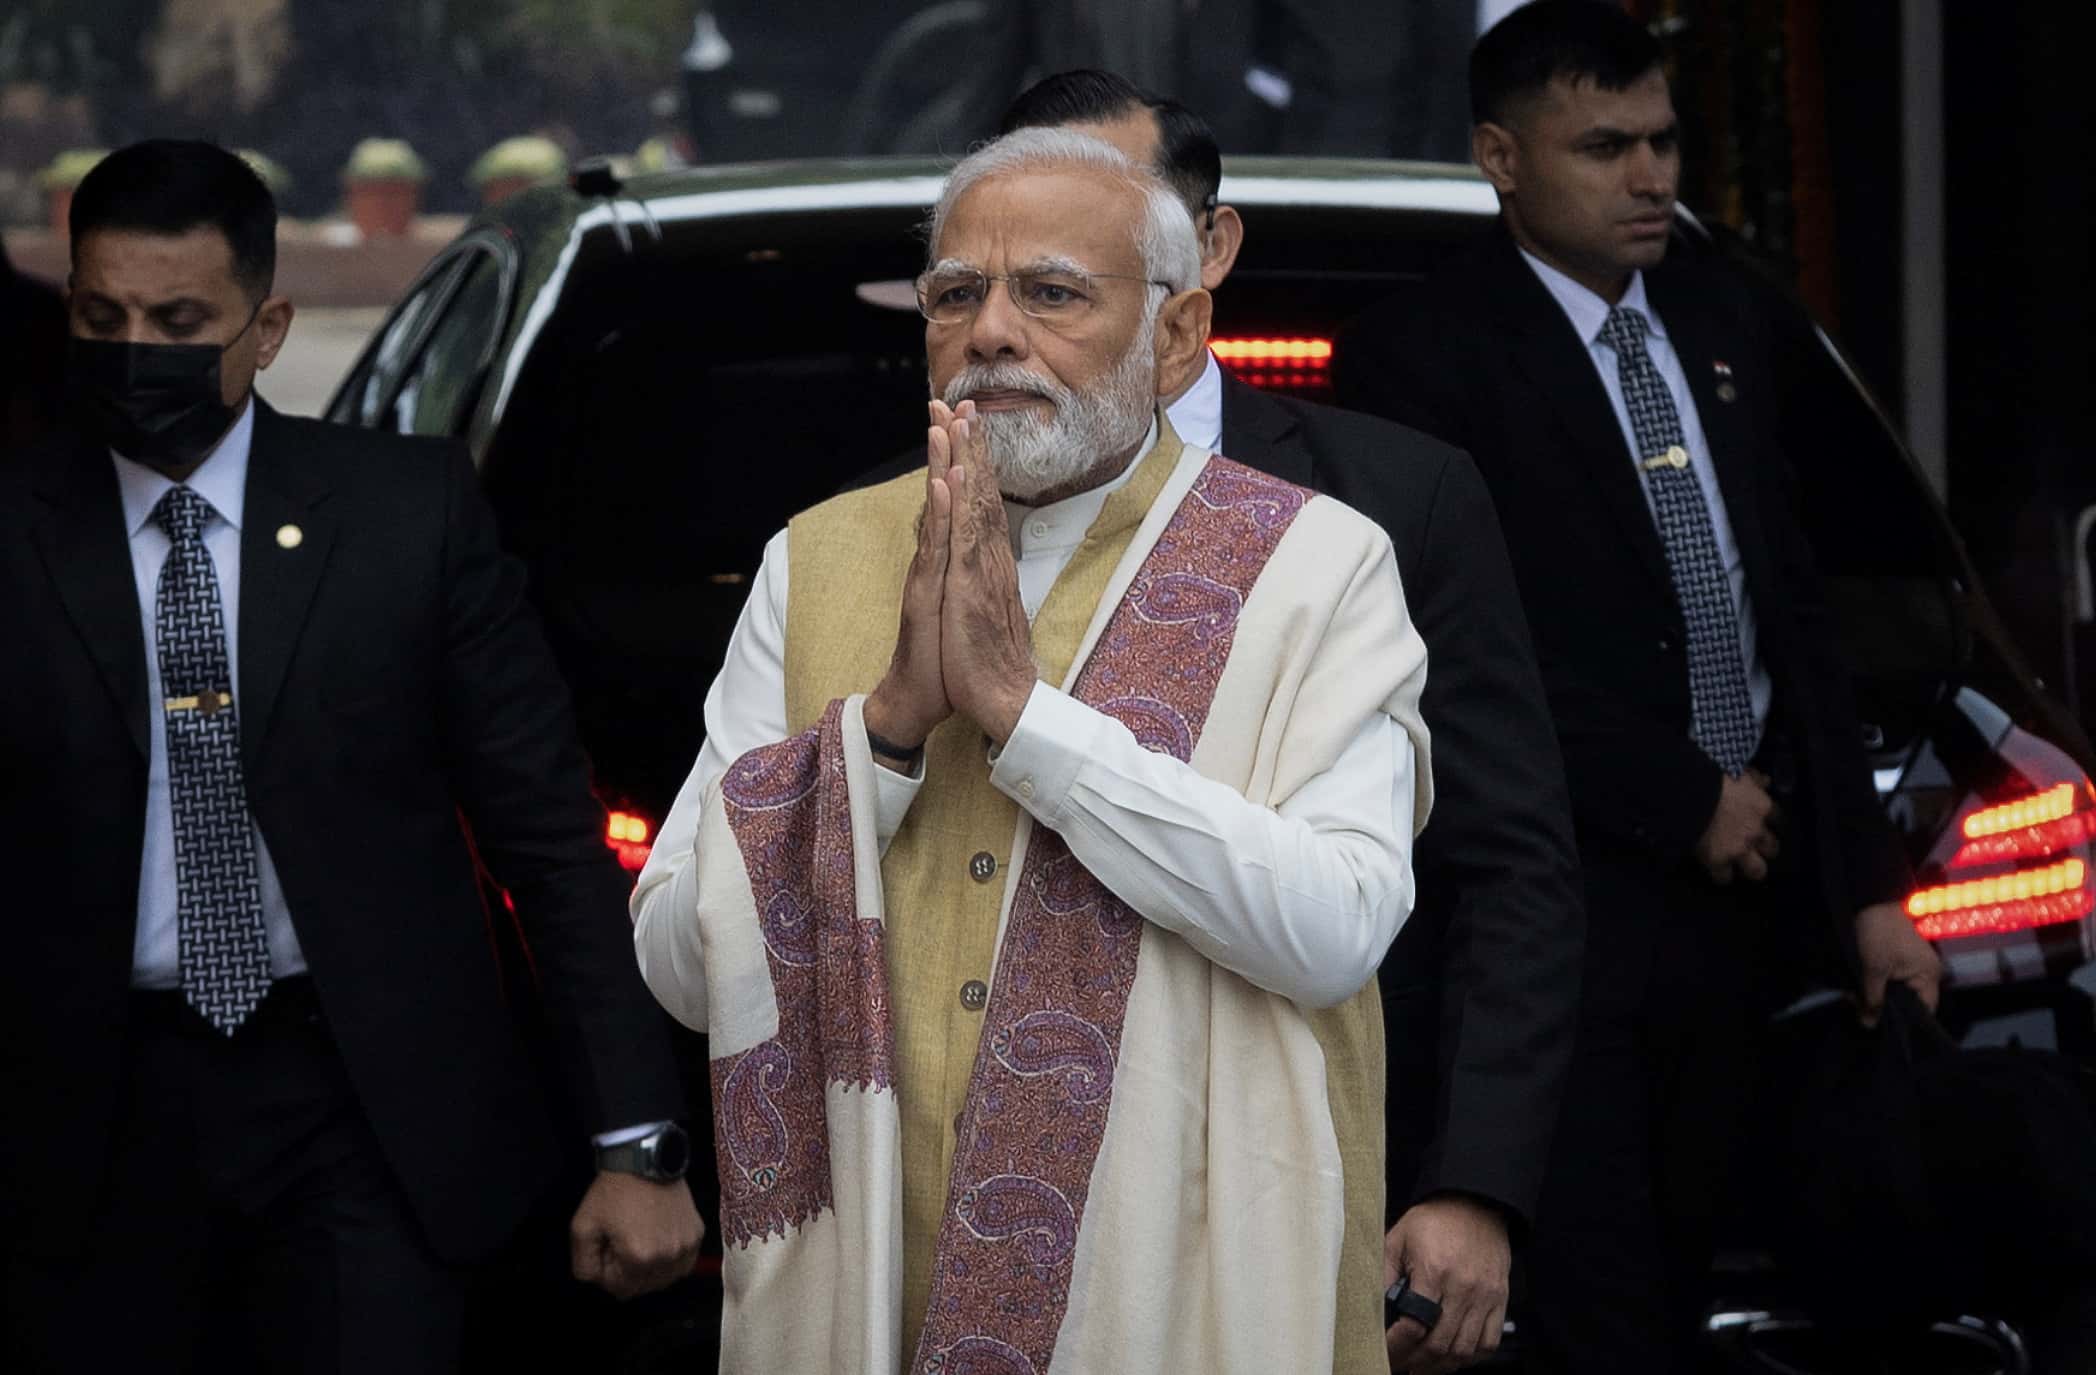 PM Modi's suit sold for Rs 4.3 crore, enters Guinness Book